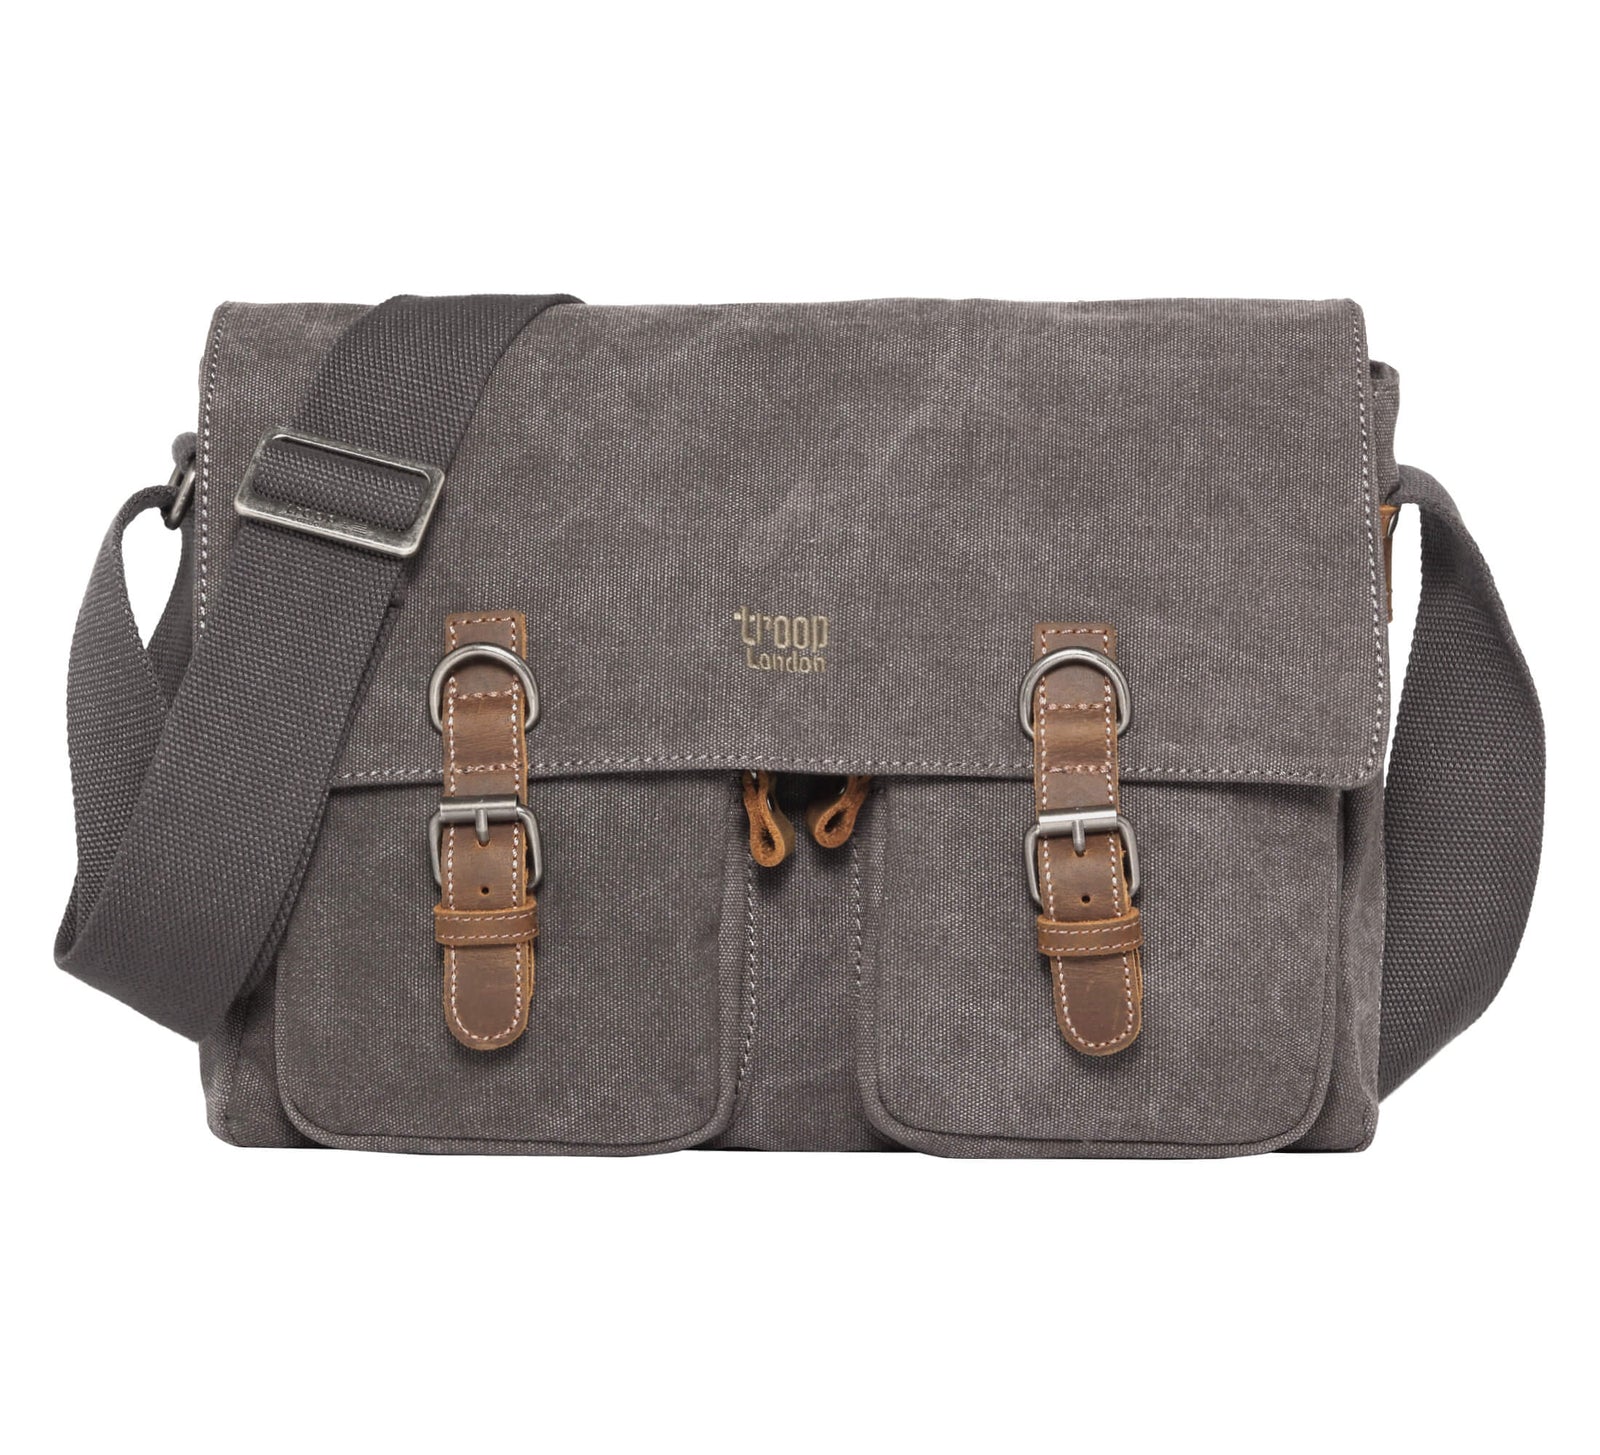 Troop London classic bag TRP0210 features distinctive front twin pocket giving style and character, spacious main compartment adds functionality.